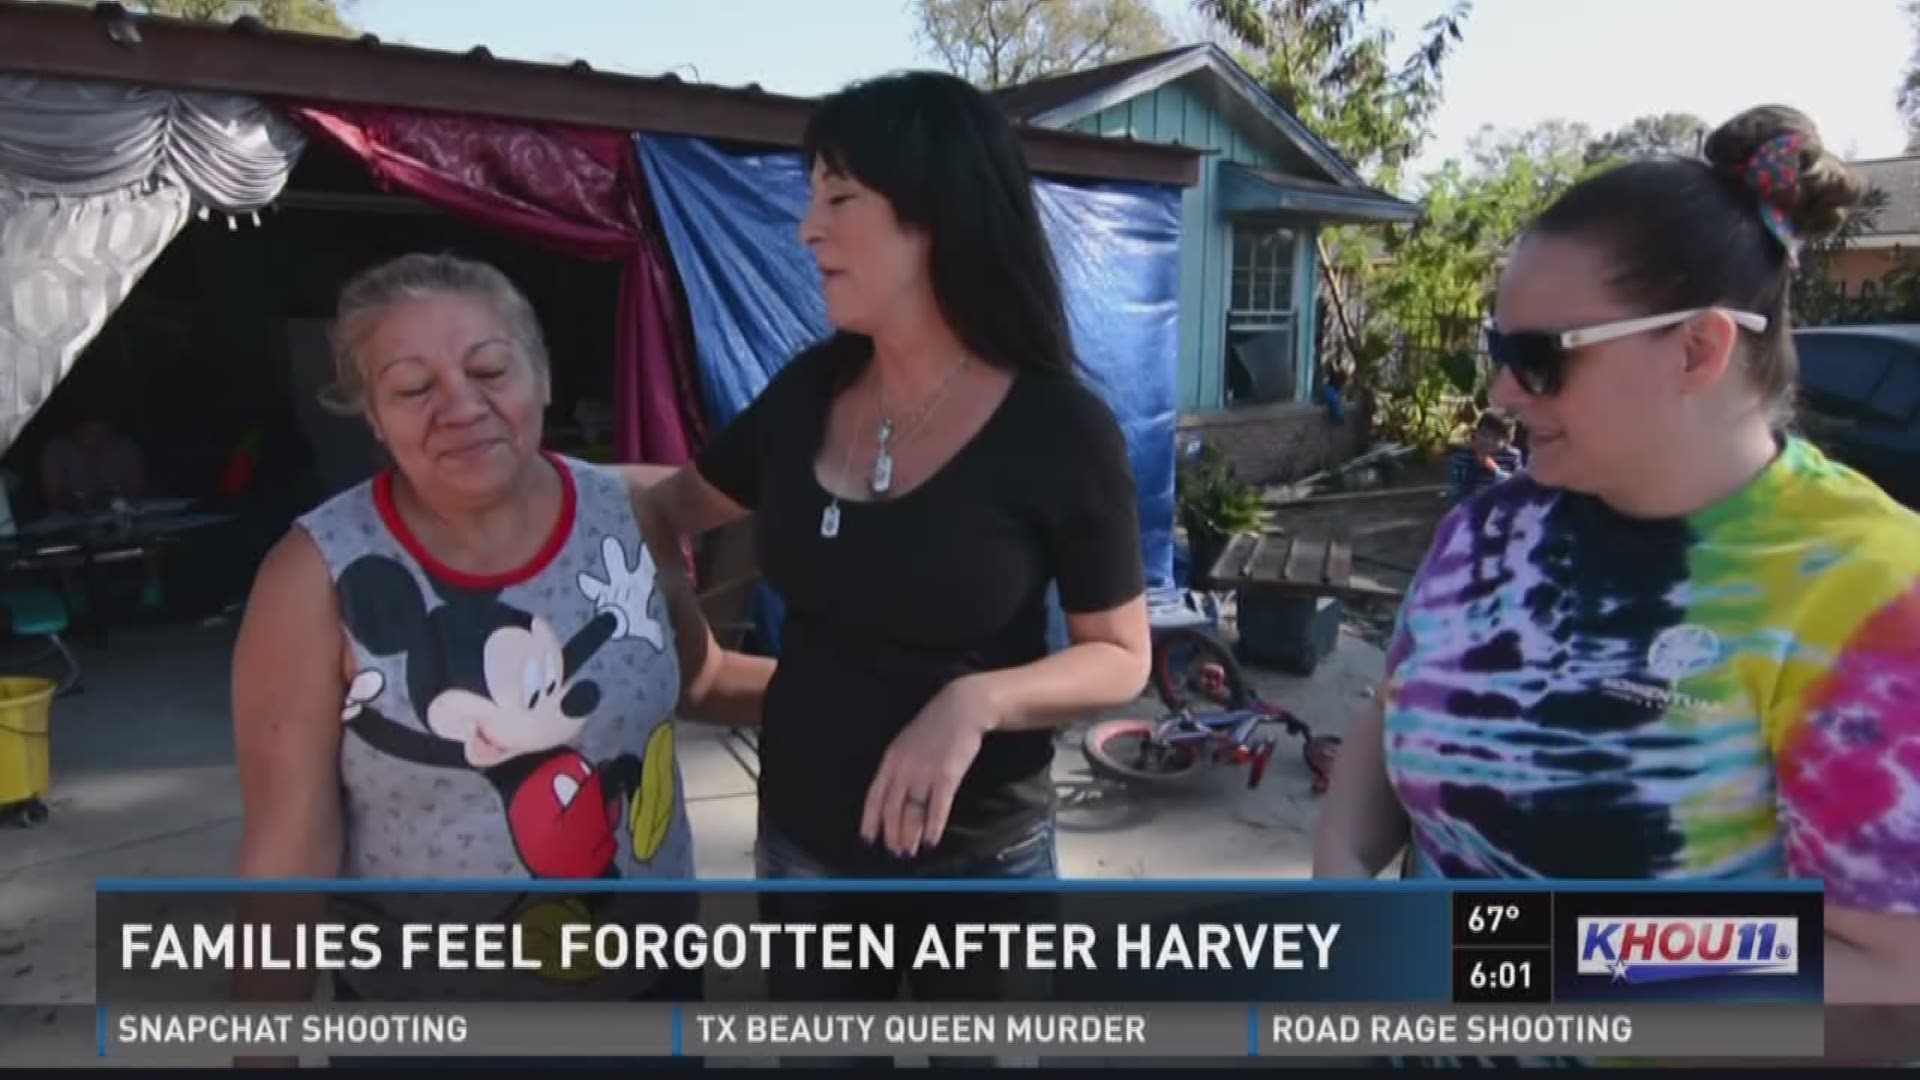 Three months after Hurricane Harvey hit and flooded her east Houston home, one grandmother is living with her family in a tent outside her home.